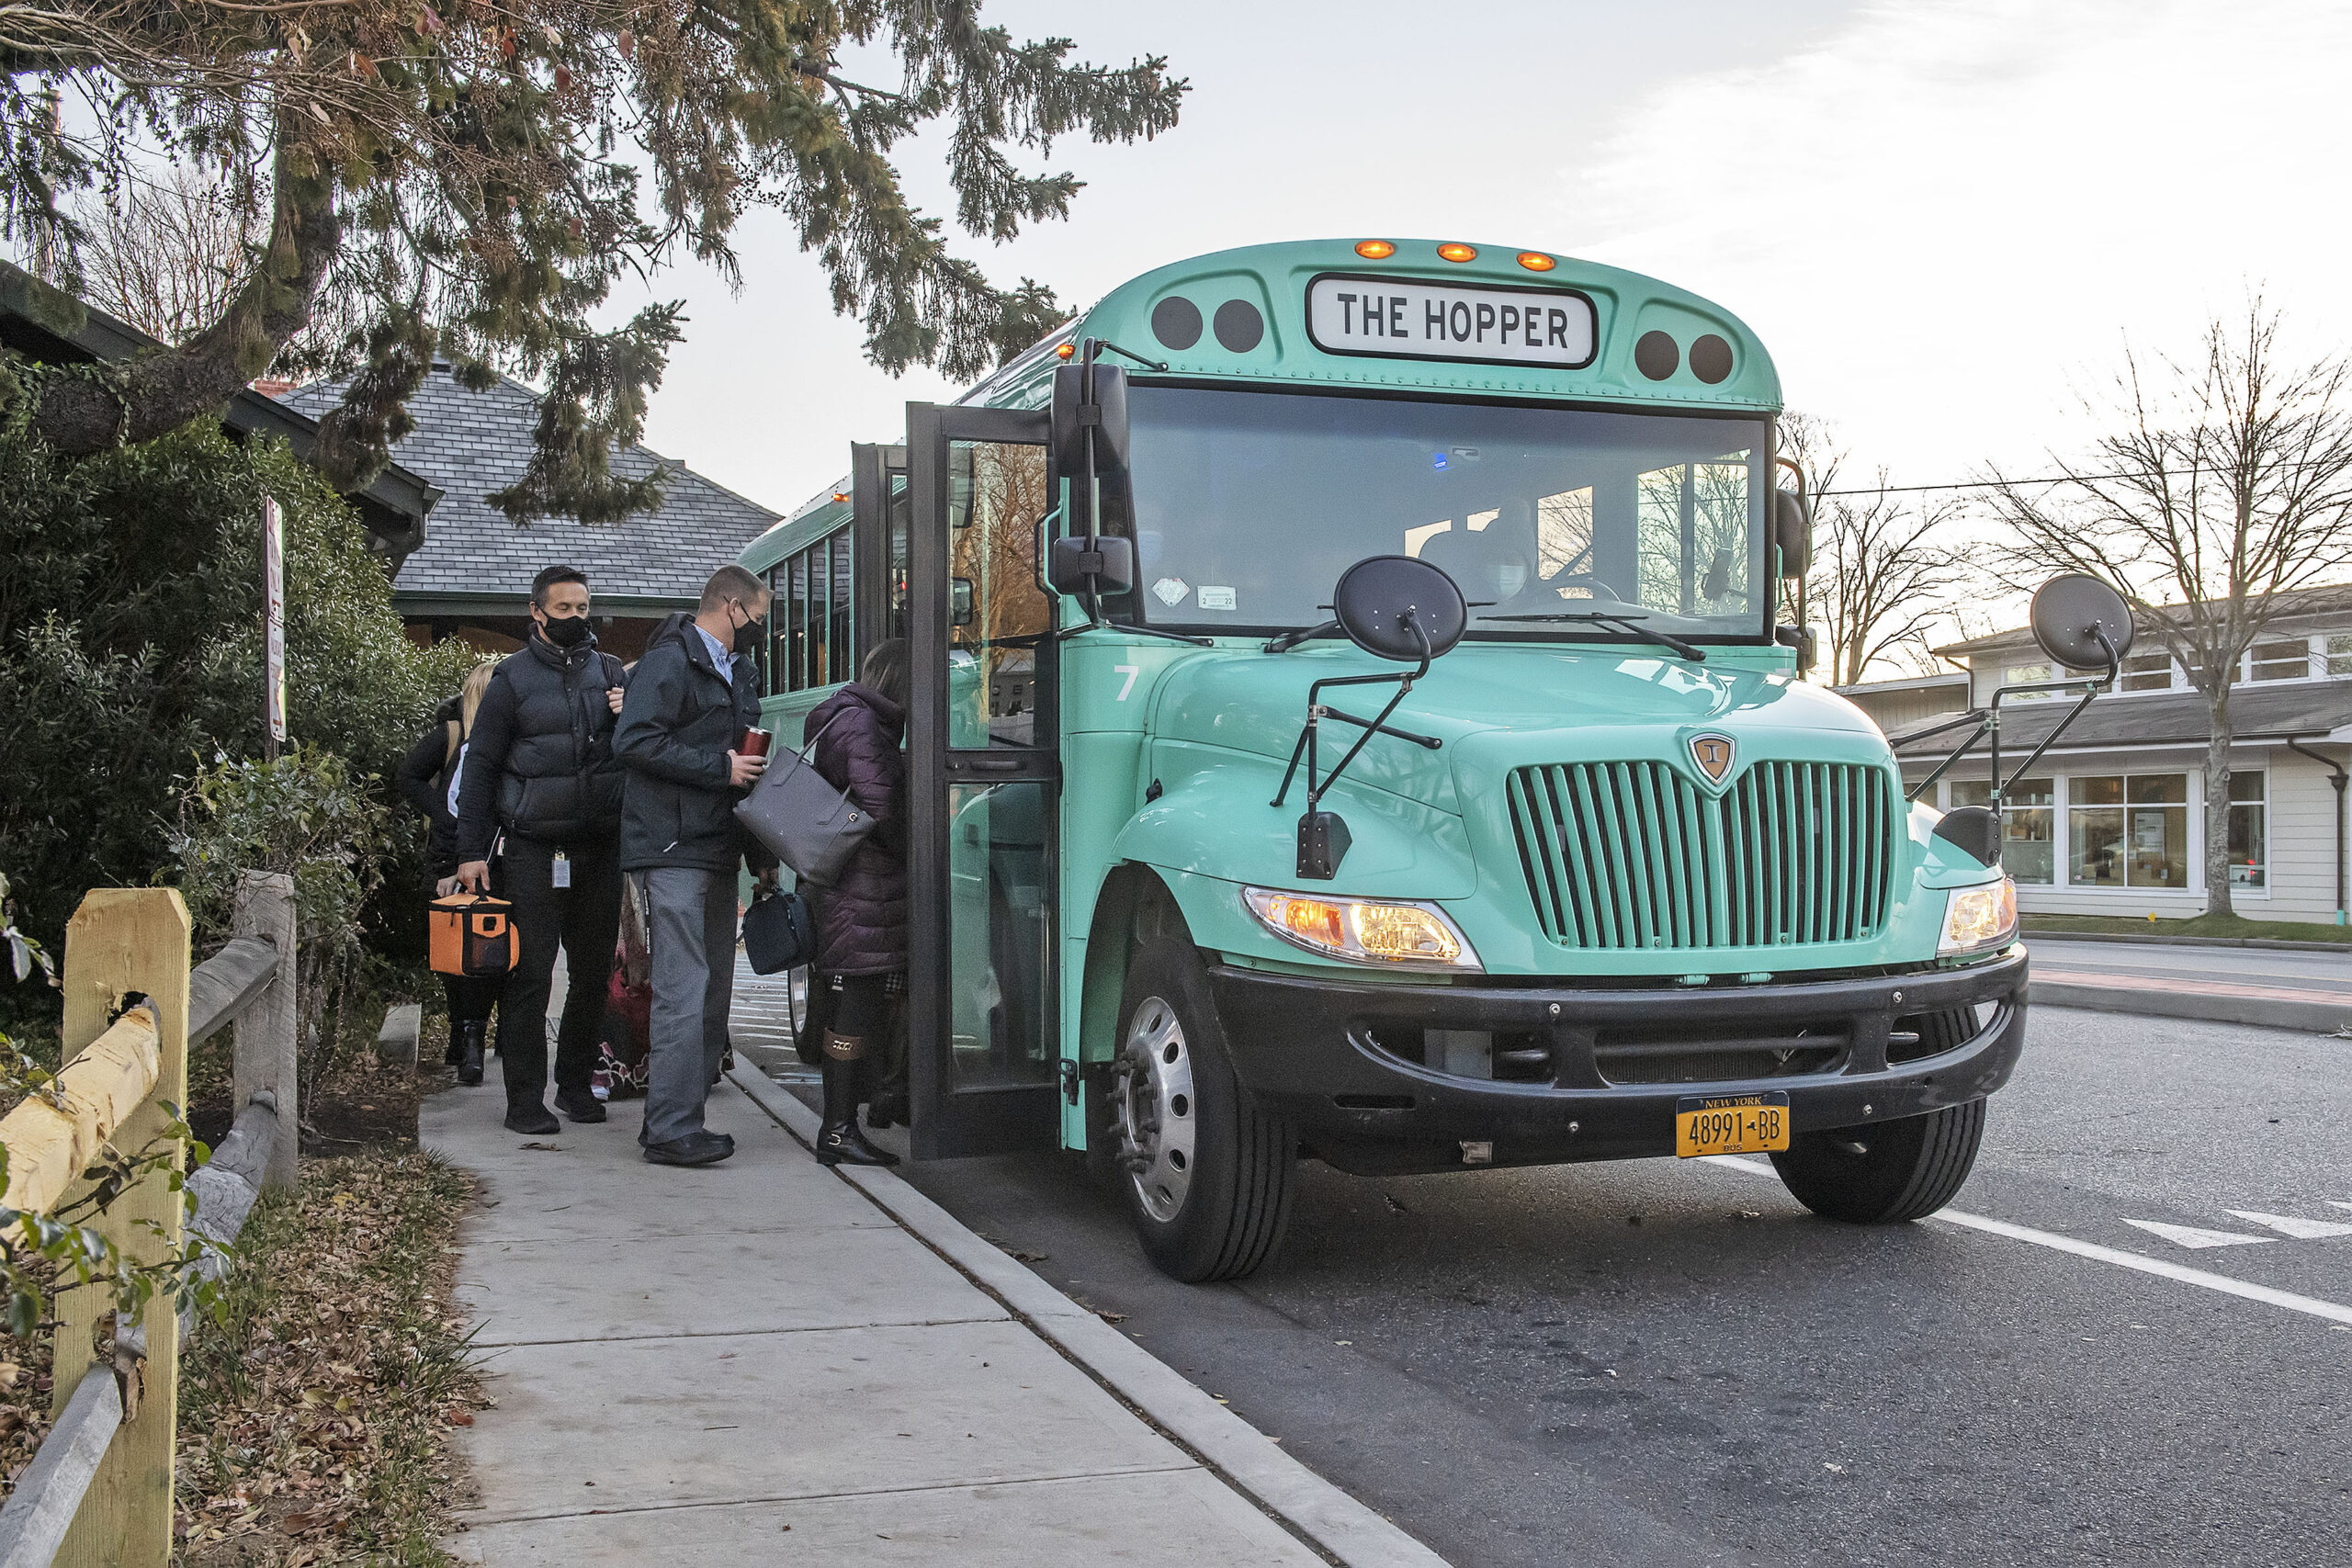 The Hampton Hopper has added a third bus to the South Fork Commuter Connection last mile shuttle service in East Hampton, allowing the Ross School and Springs School to be added to the connection.